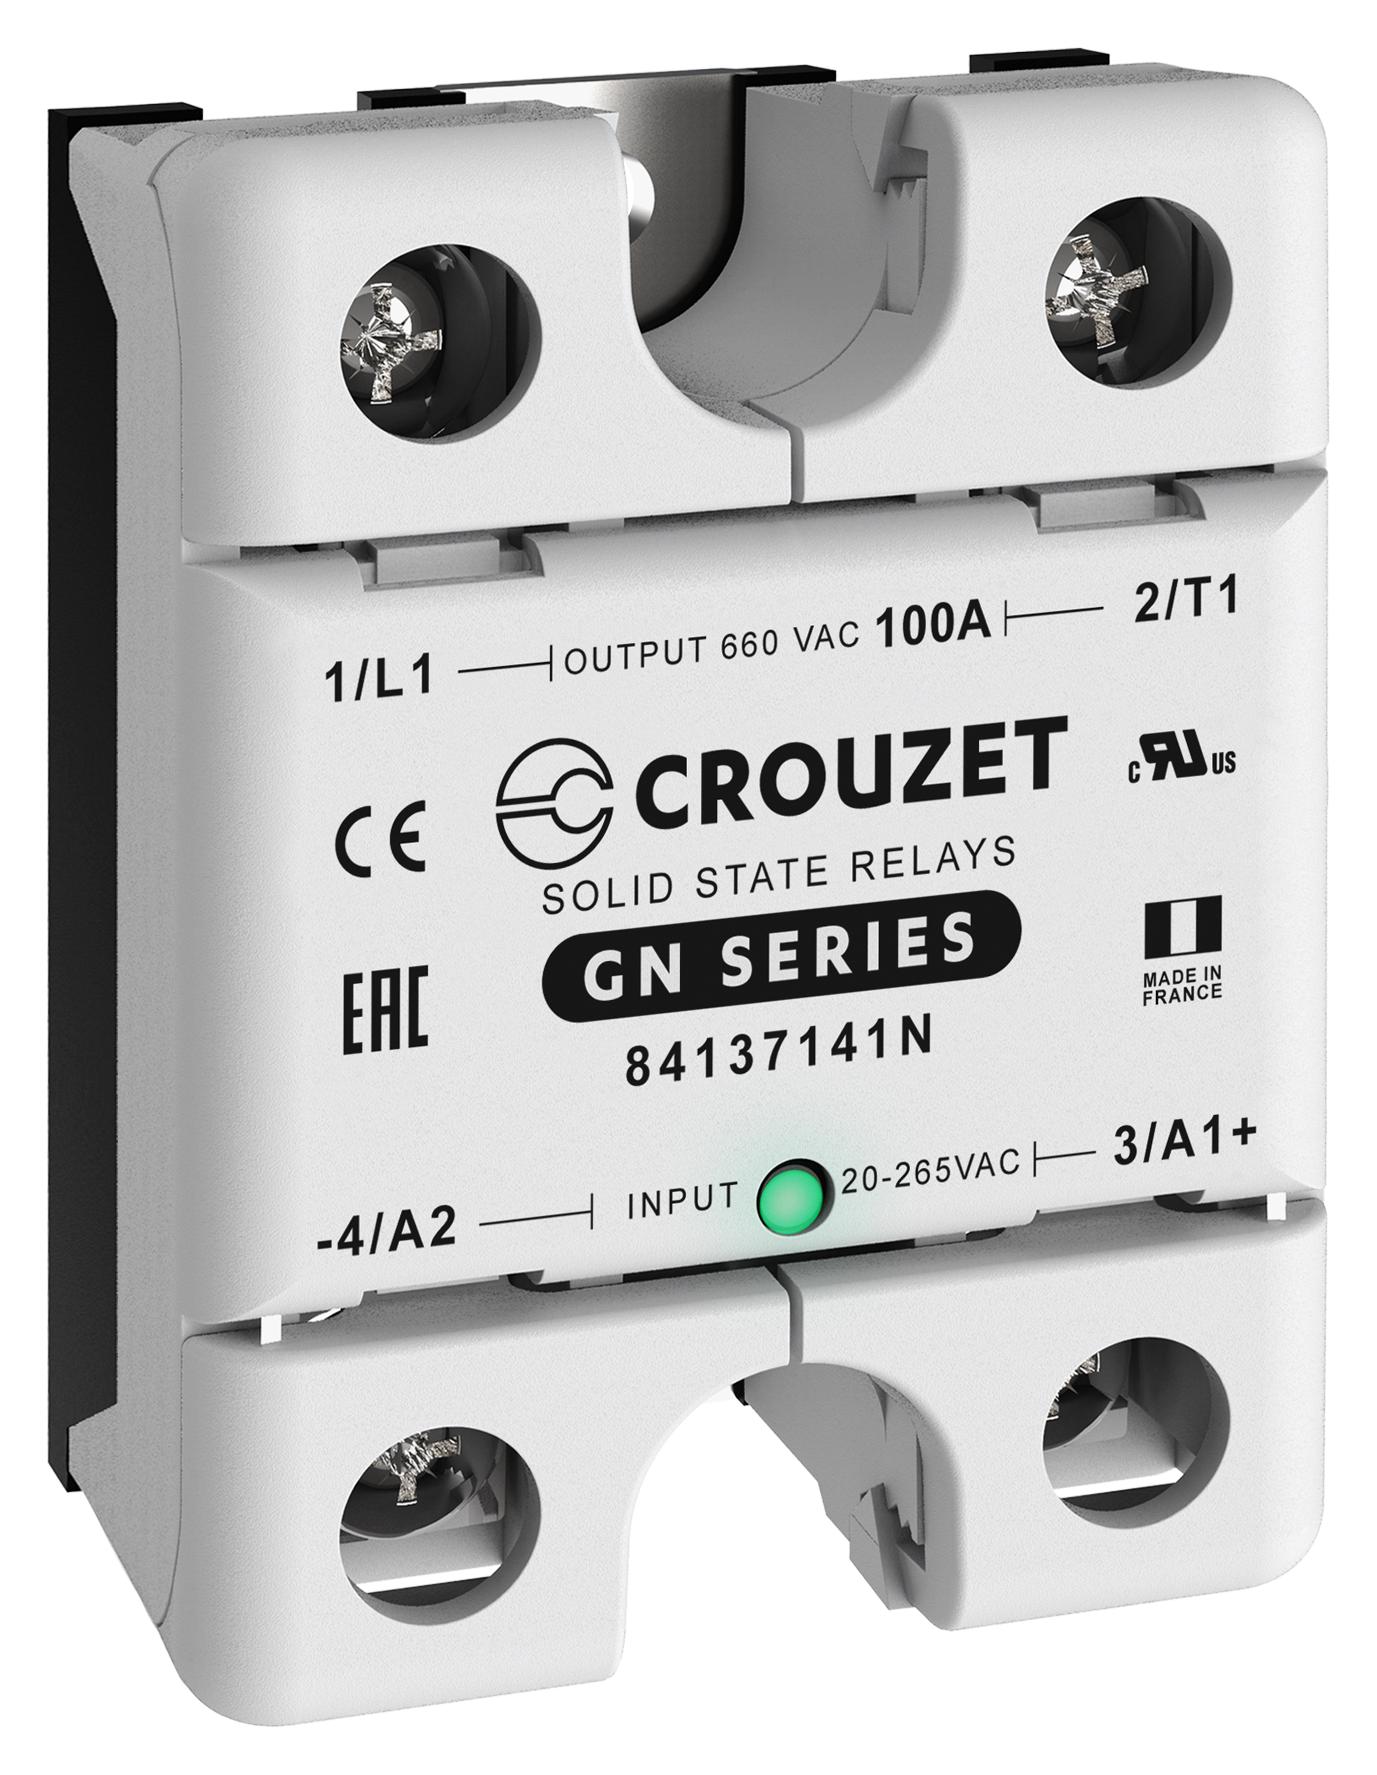 84137141N SOLID STATE RELAY, 100A, 48-660VAC/PANEL CROUZET